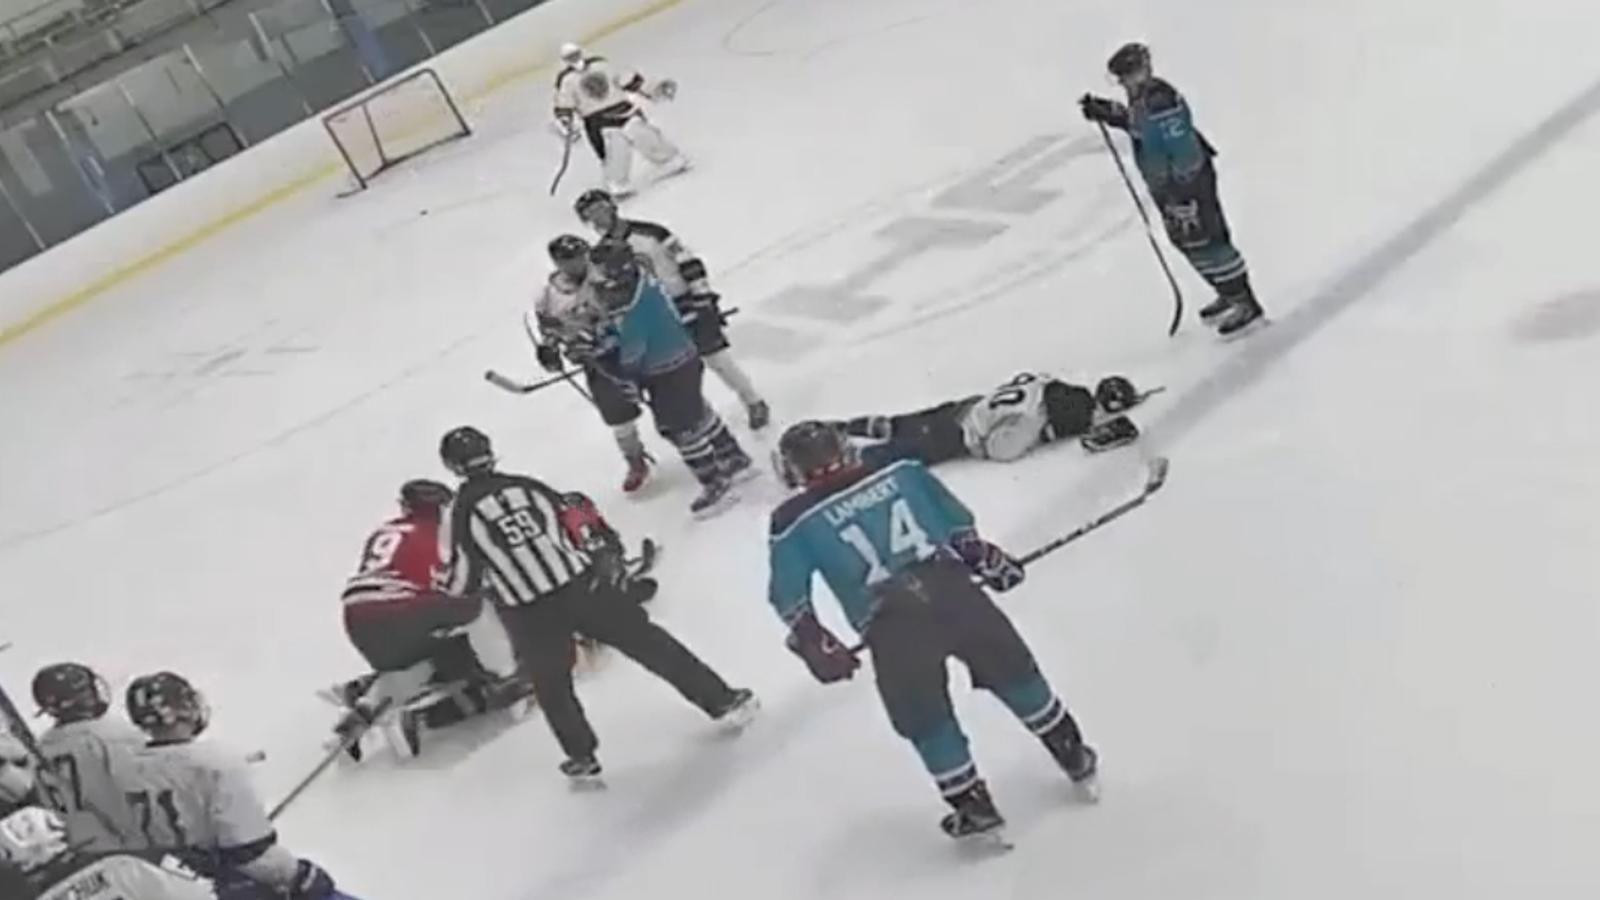 Police gets involved in player using skate blade to attack rival’s face on ice!